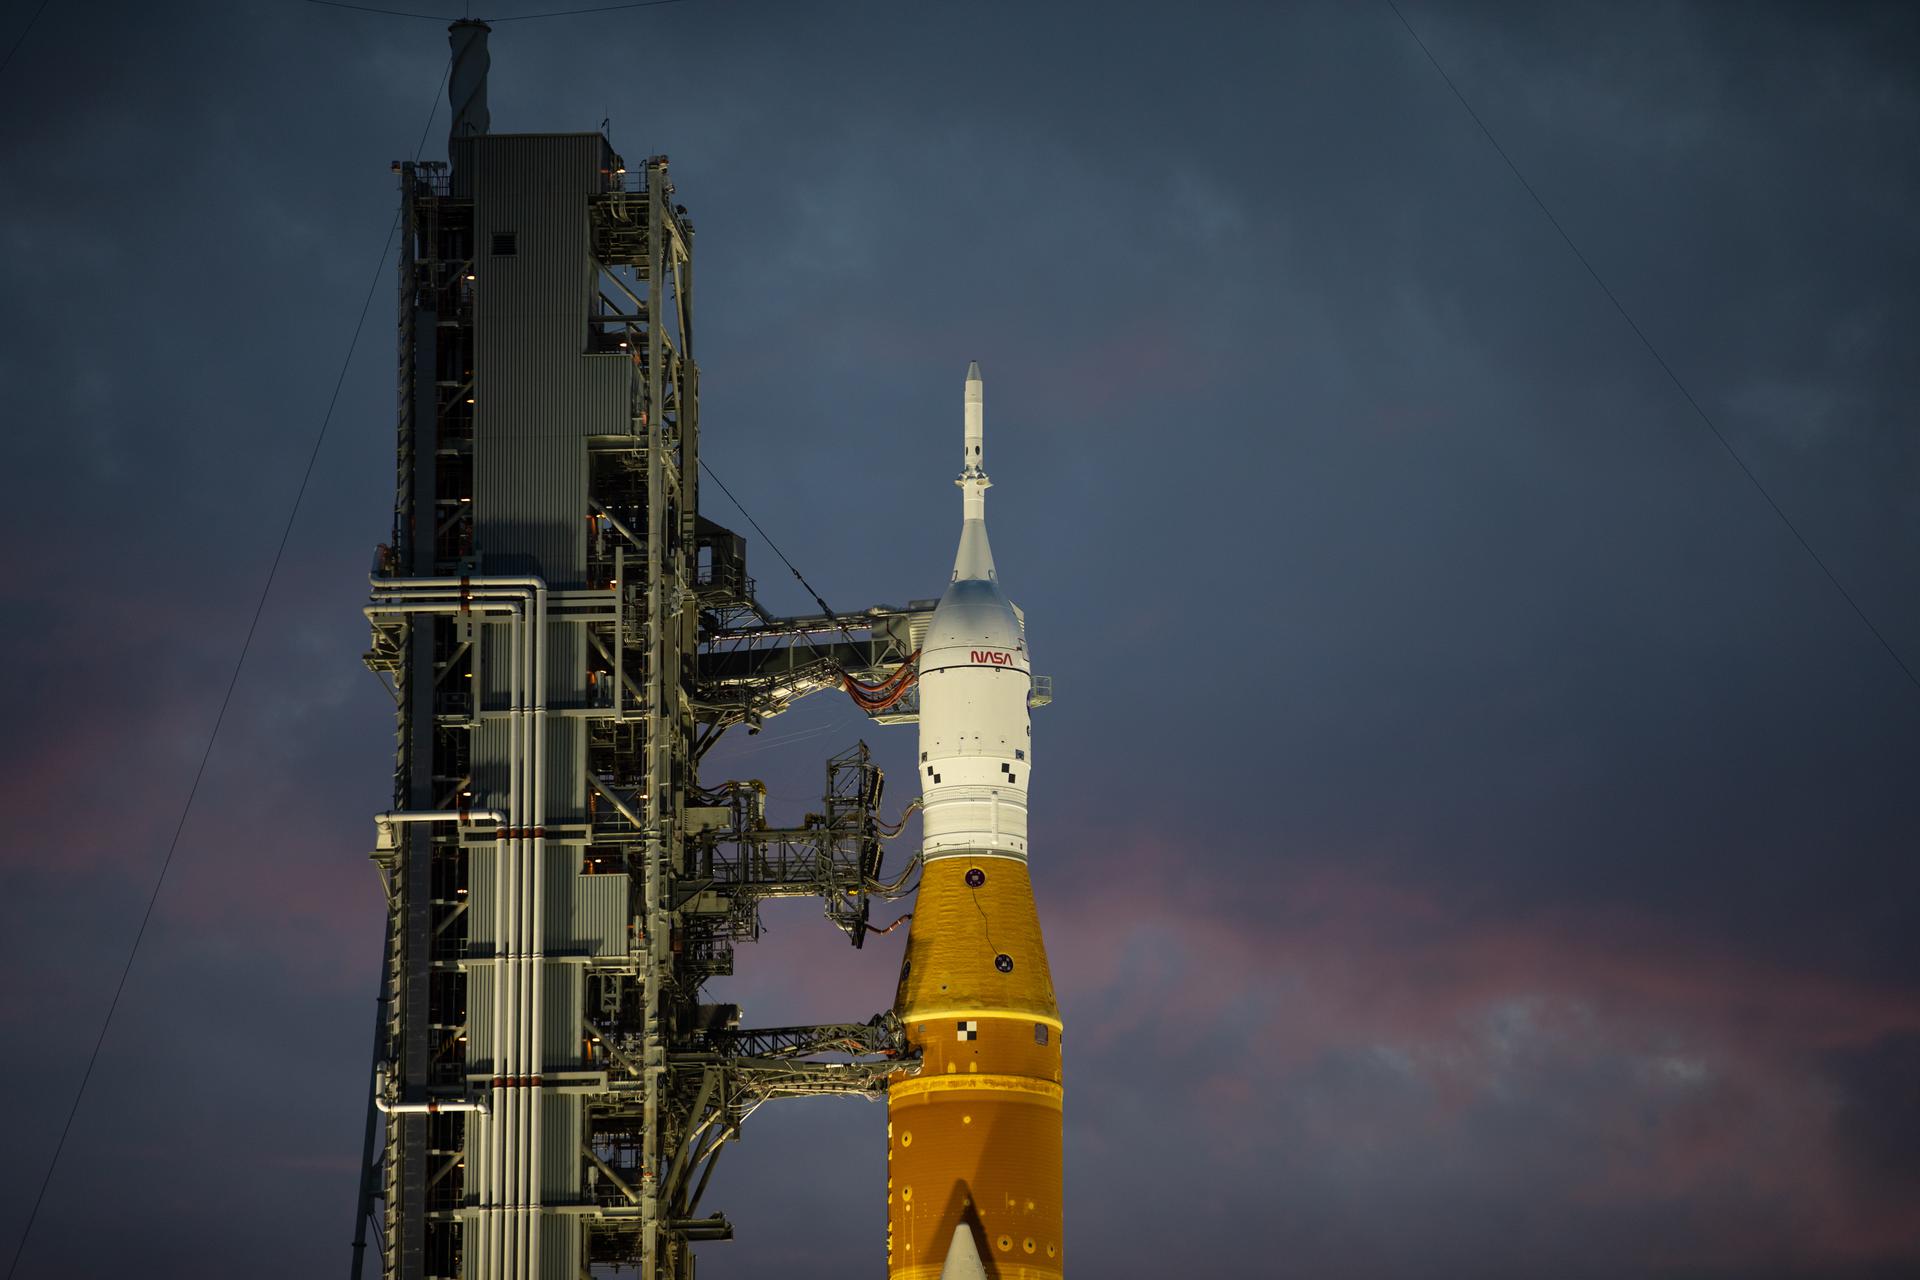 Orion spacecraft on top of Space Launch System.